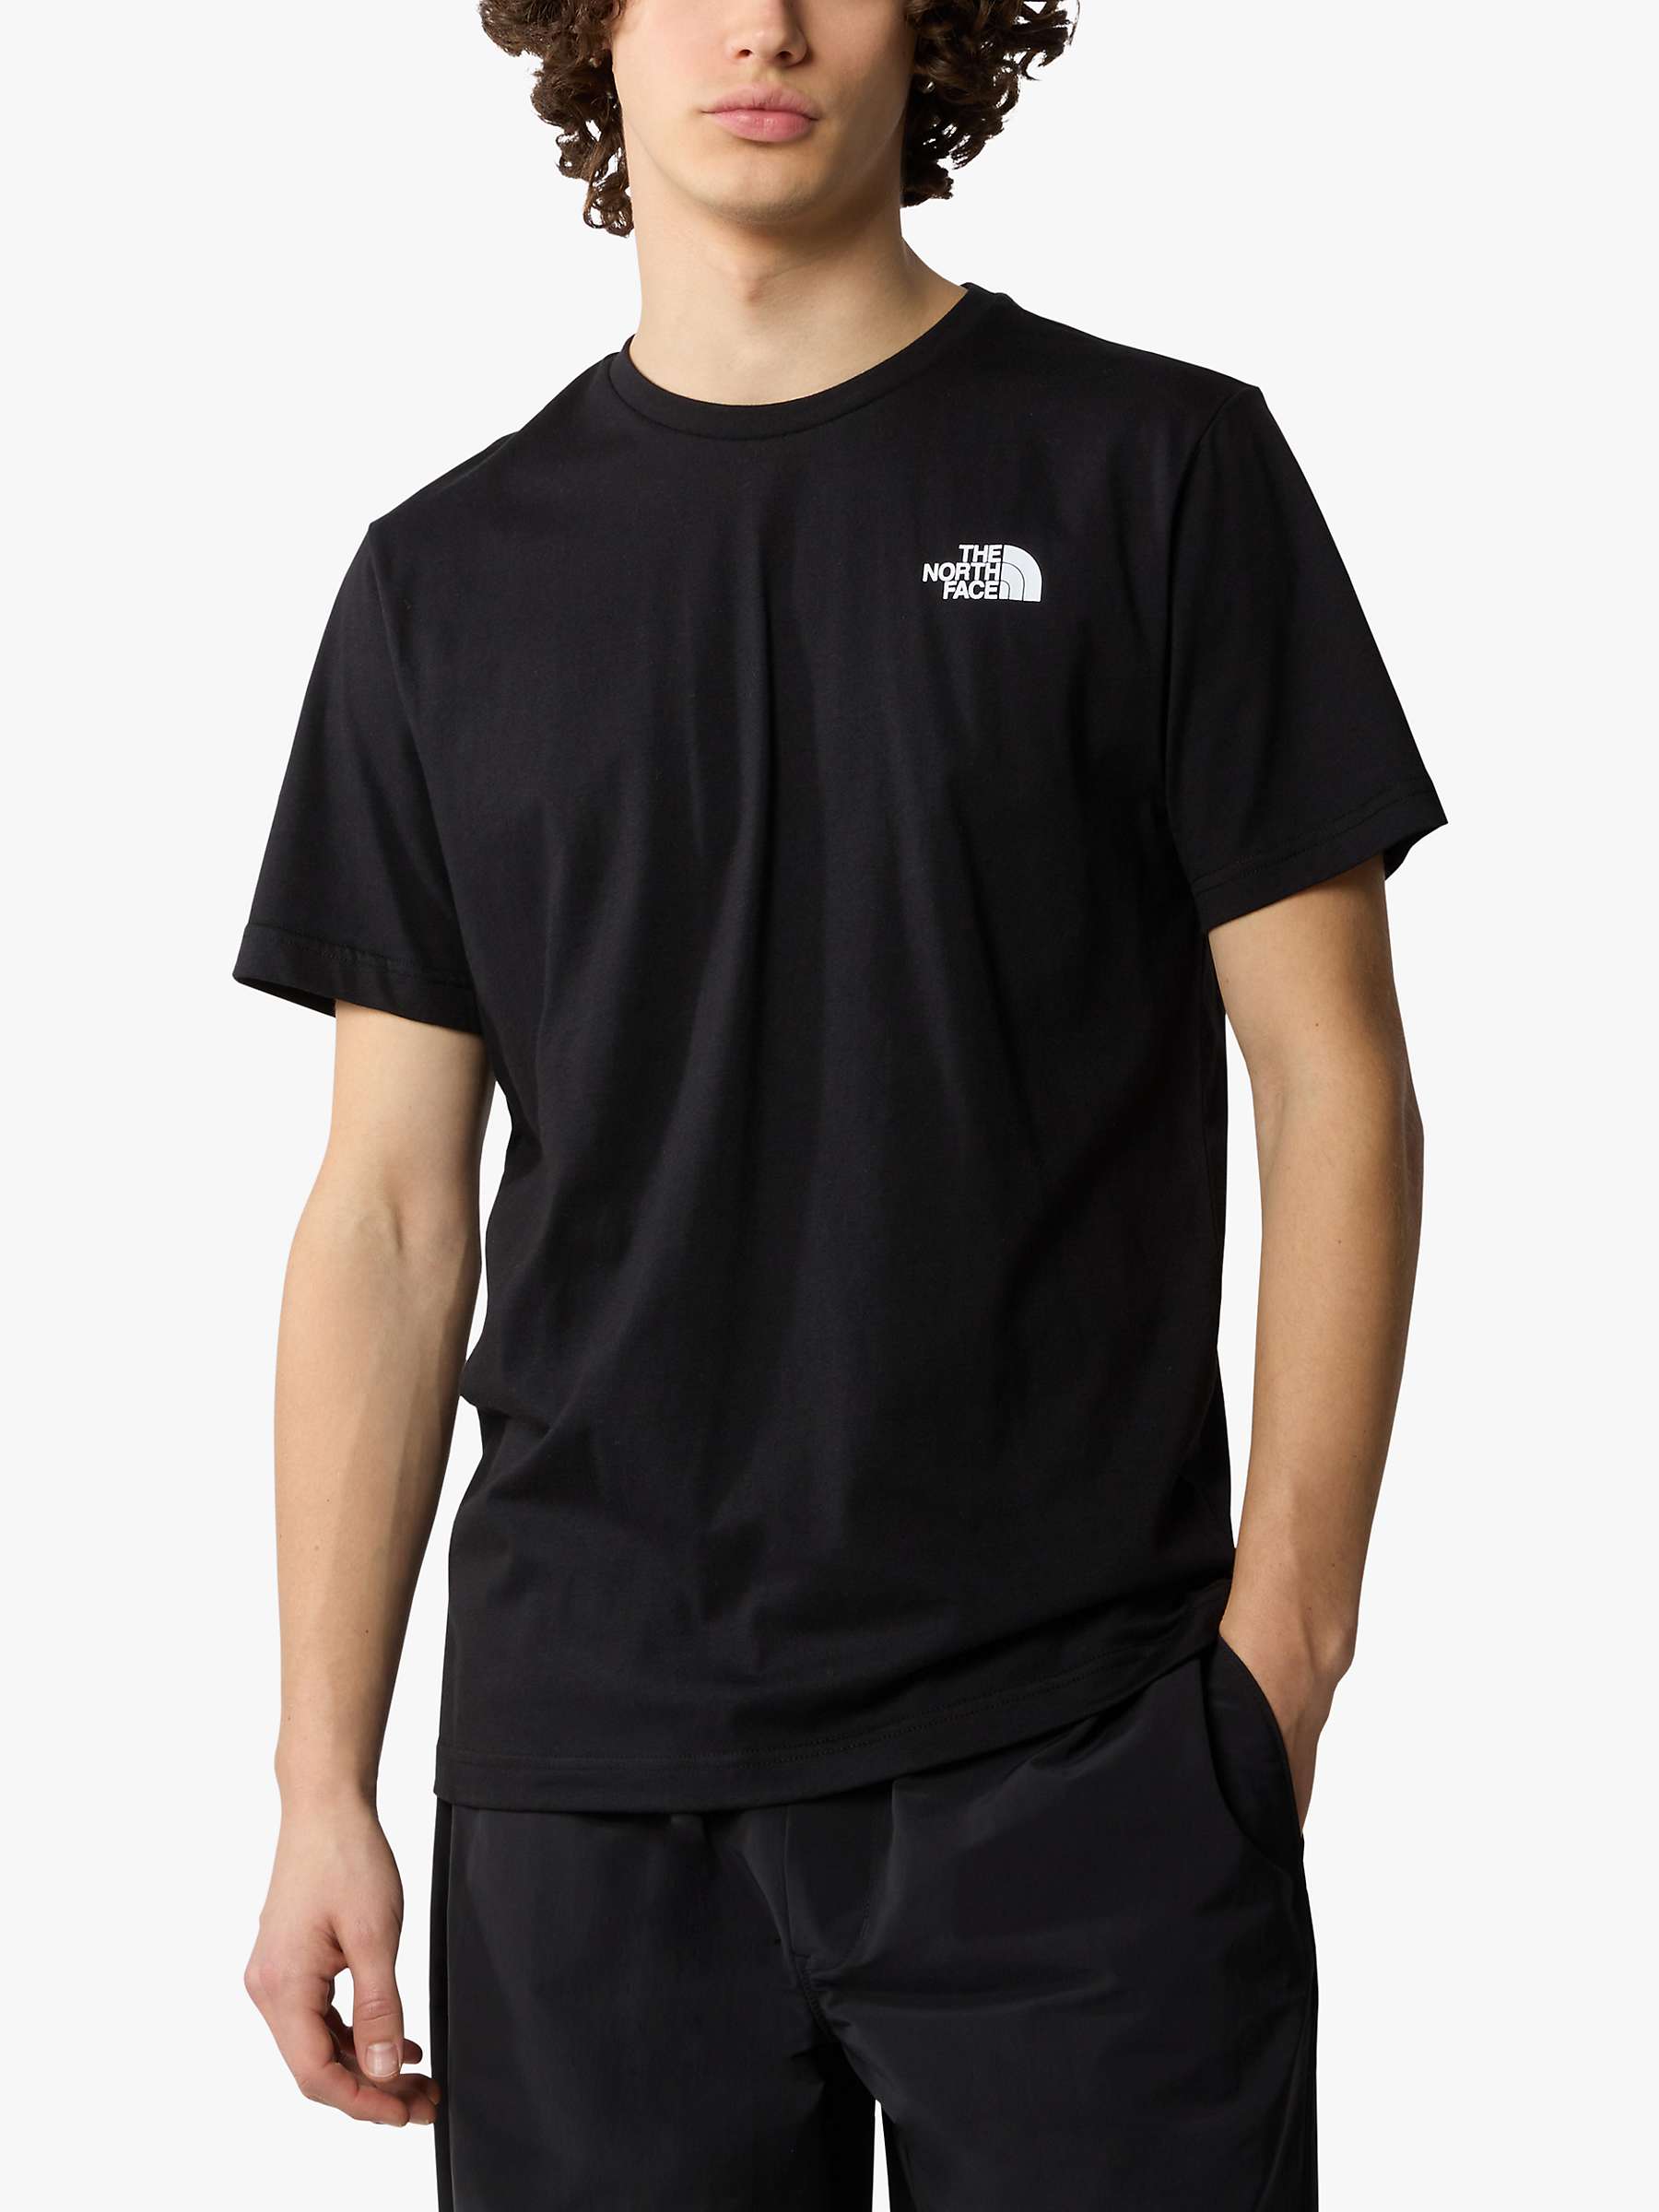 Buy The North Face Redbox Cotton T-Shirt, Black Optic/Emerald Online at johnlewis.com